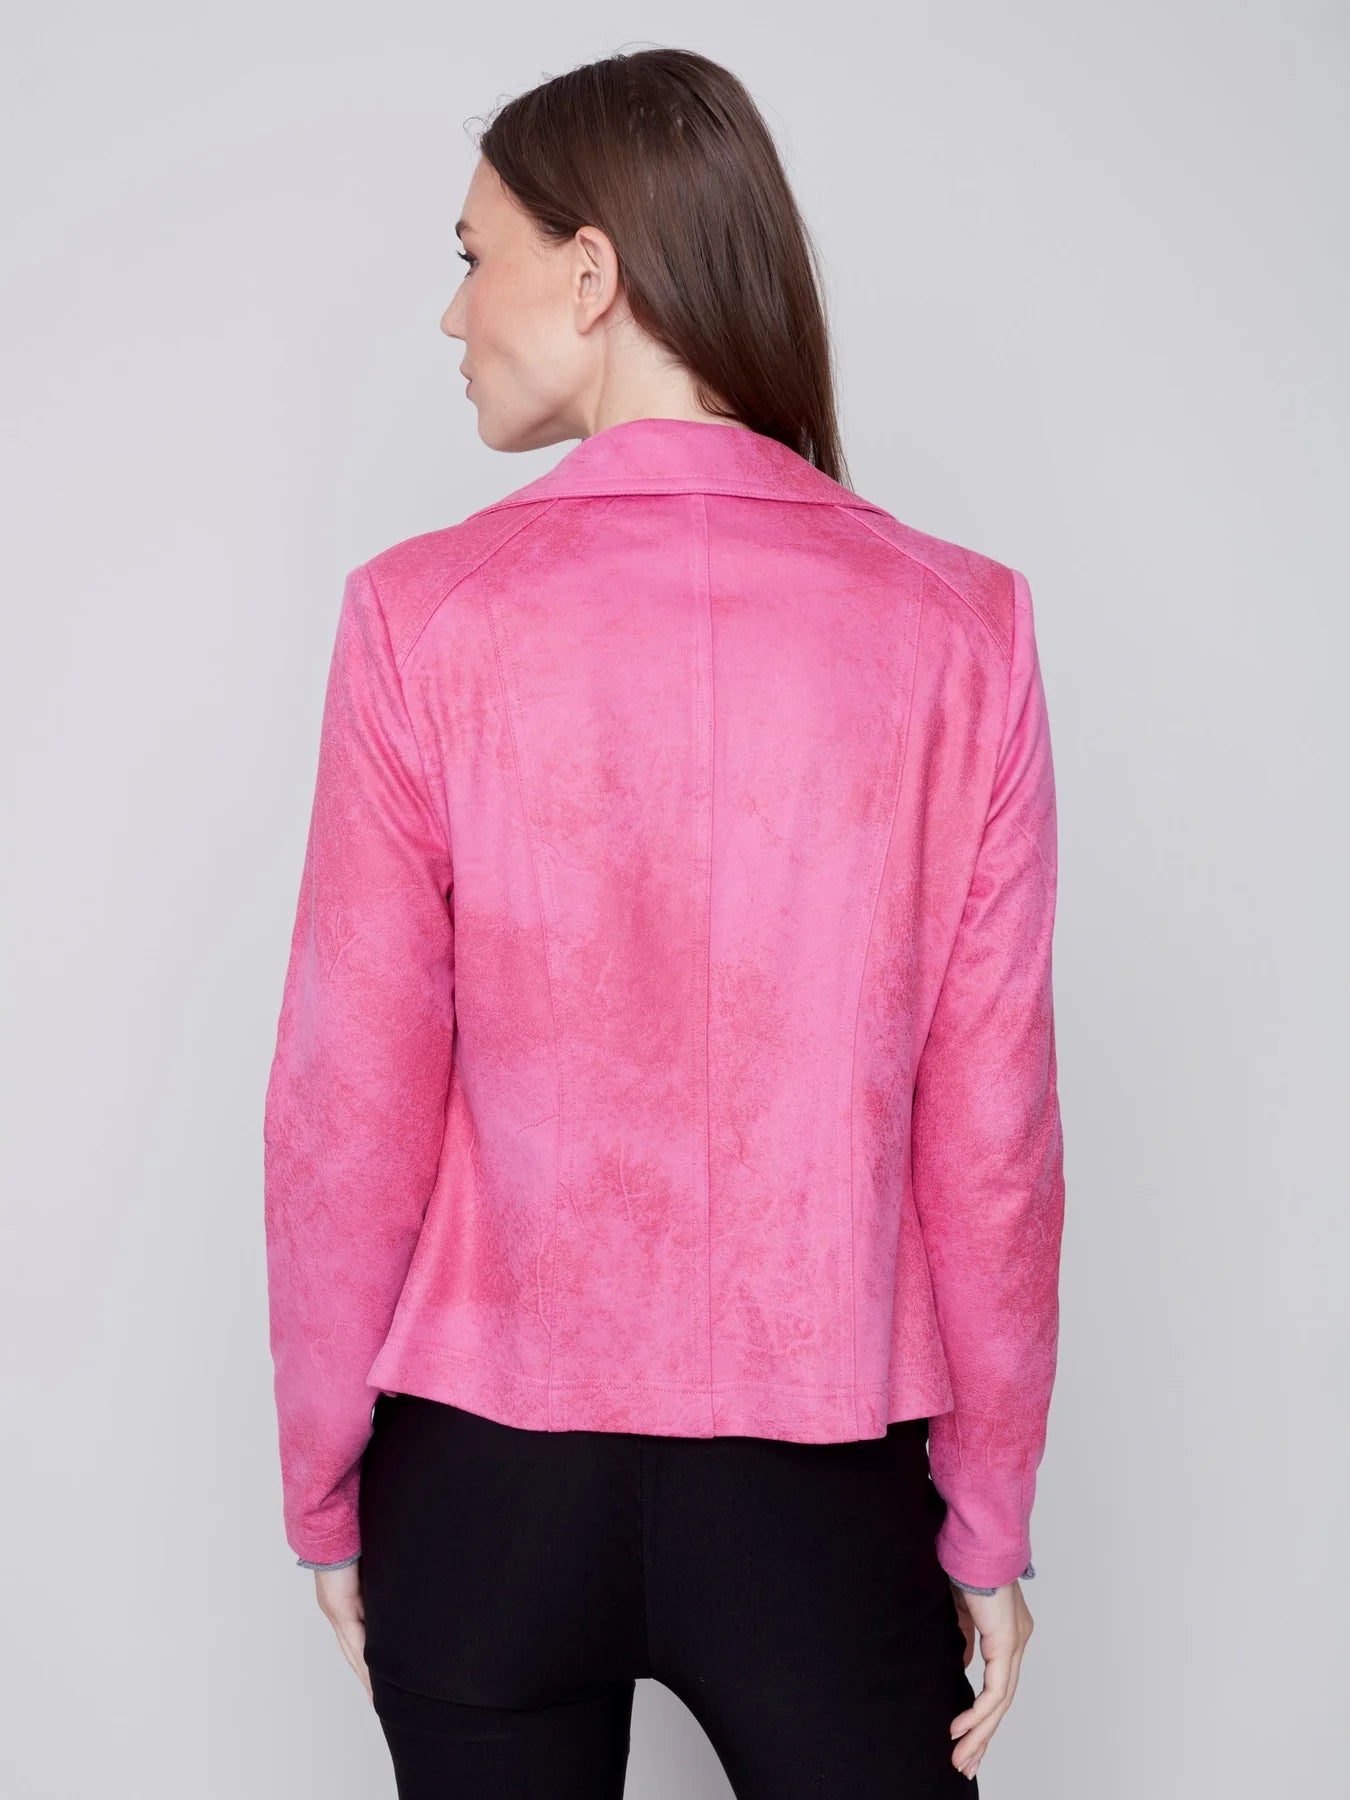 Vintage Faux Leather Perfecto Jacket - Orchid Jacket Charlie B   